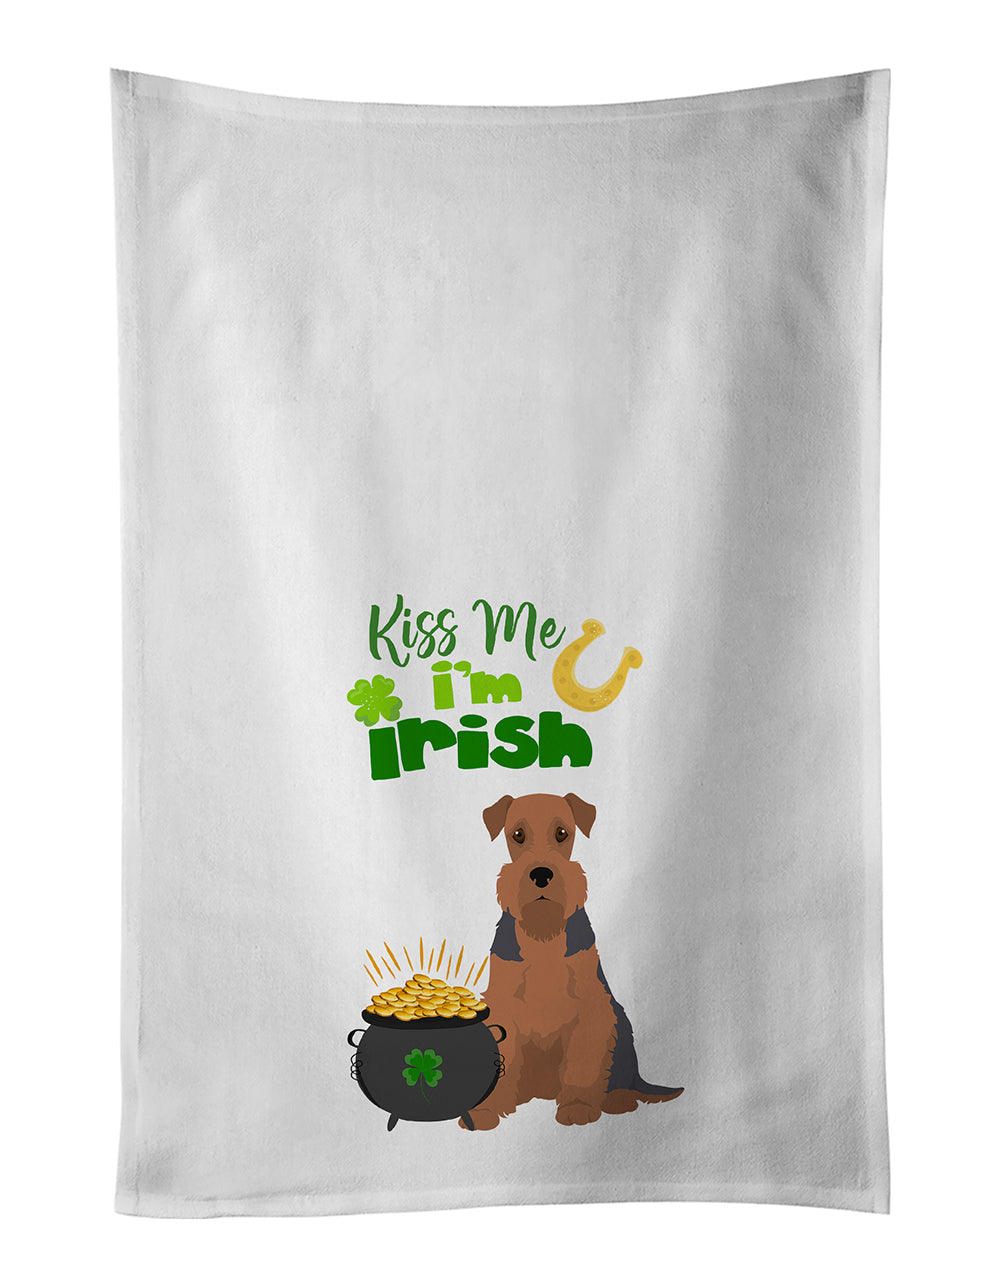 Buy this Grizzle and Tan Airedale Terrier St. Patrick's Day White Kitchen Towel Set of 2 Dish Towels